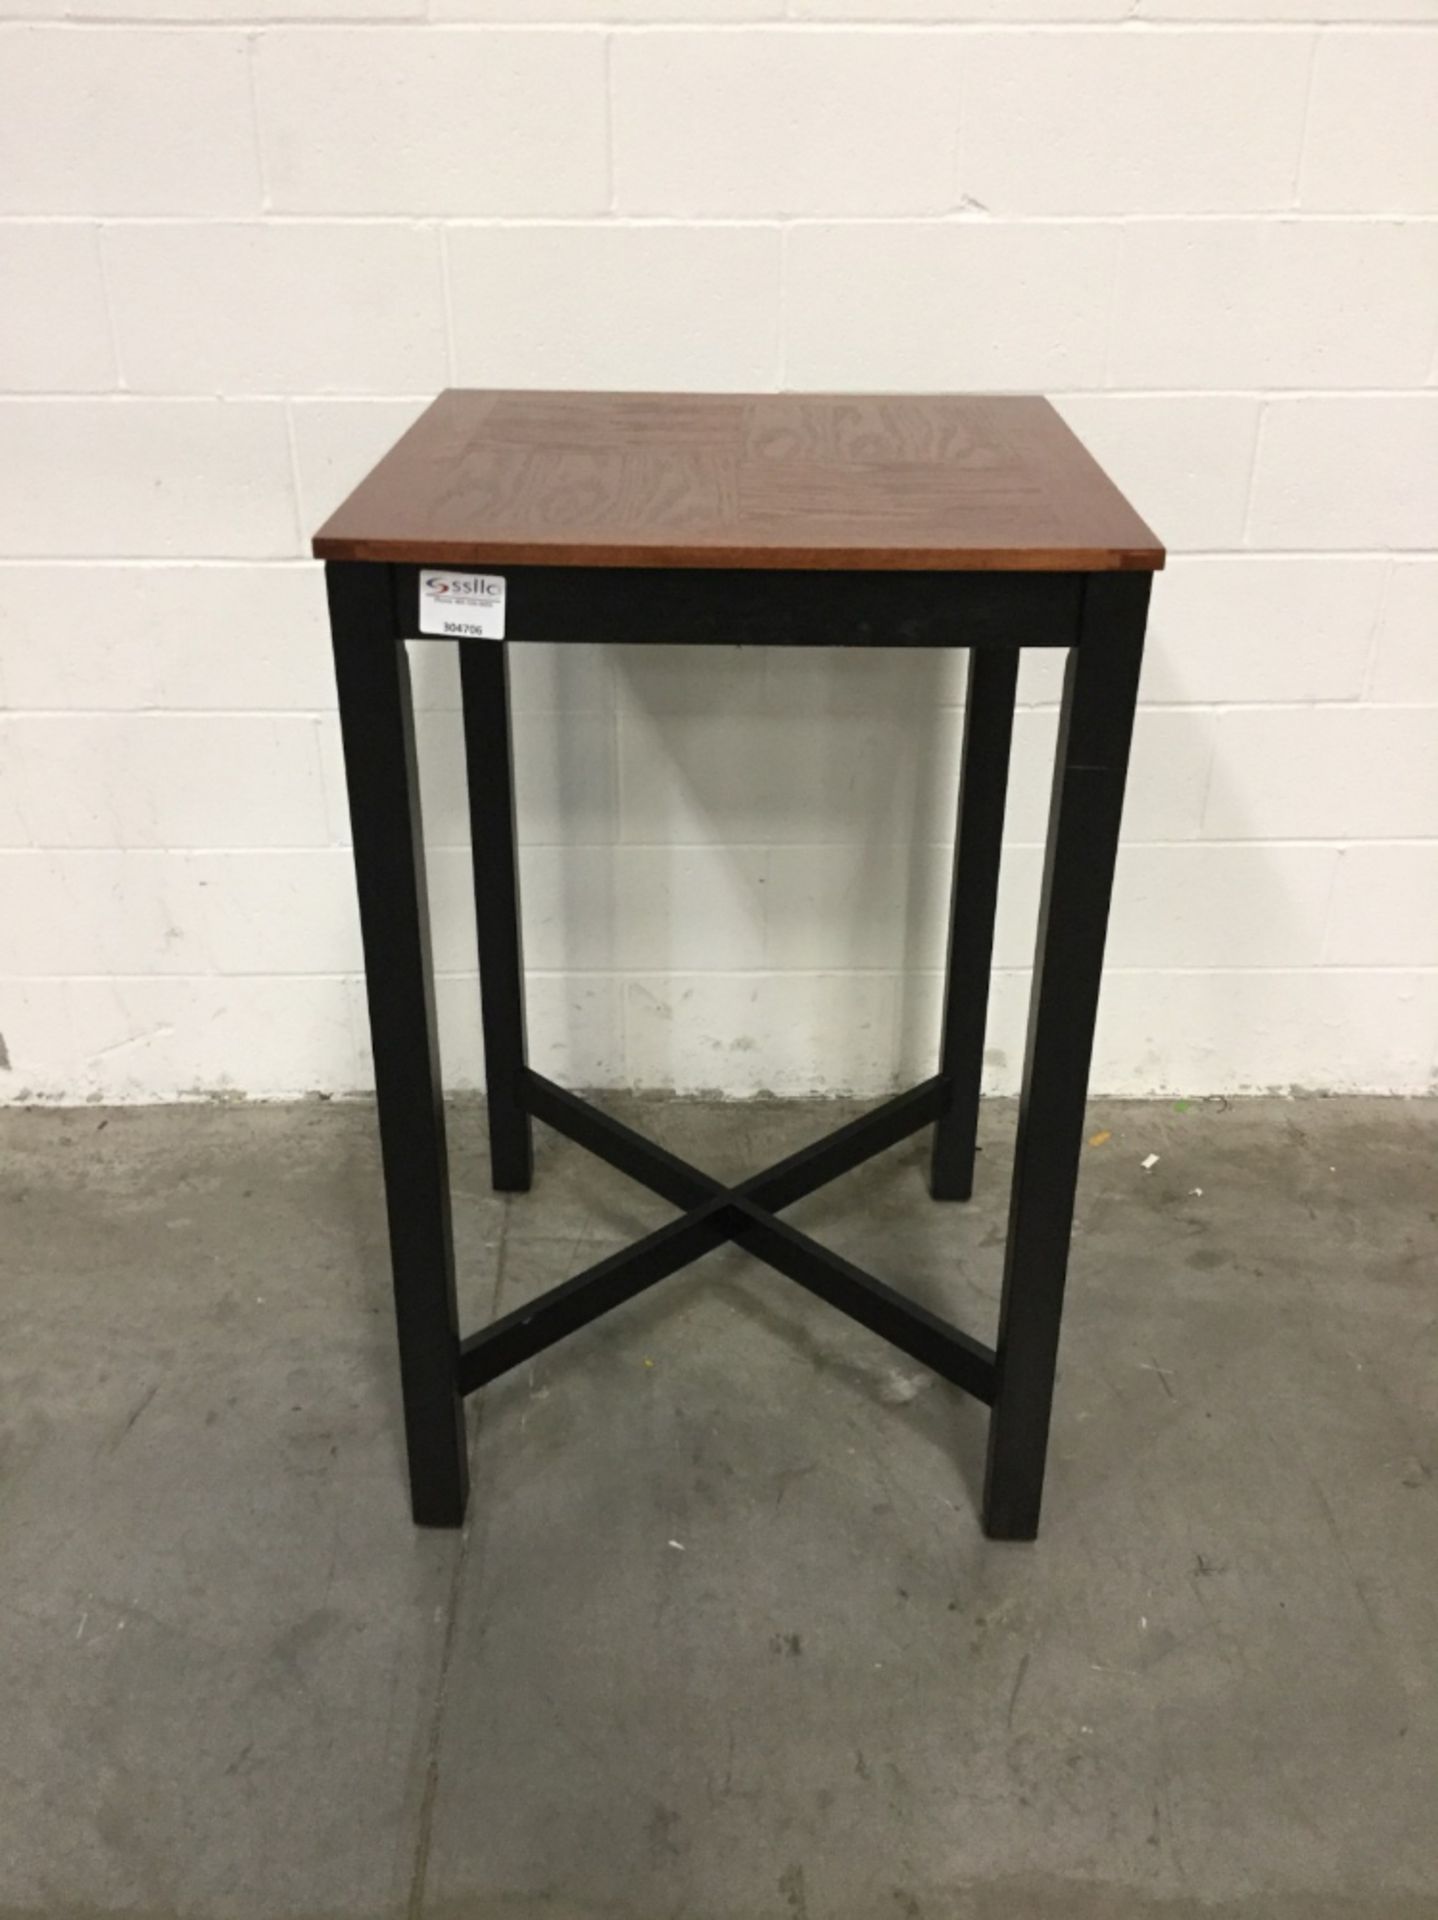 27" Square High Top Table